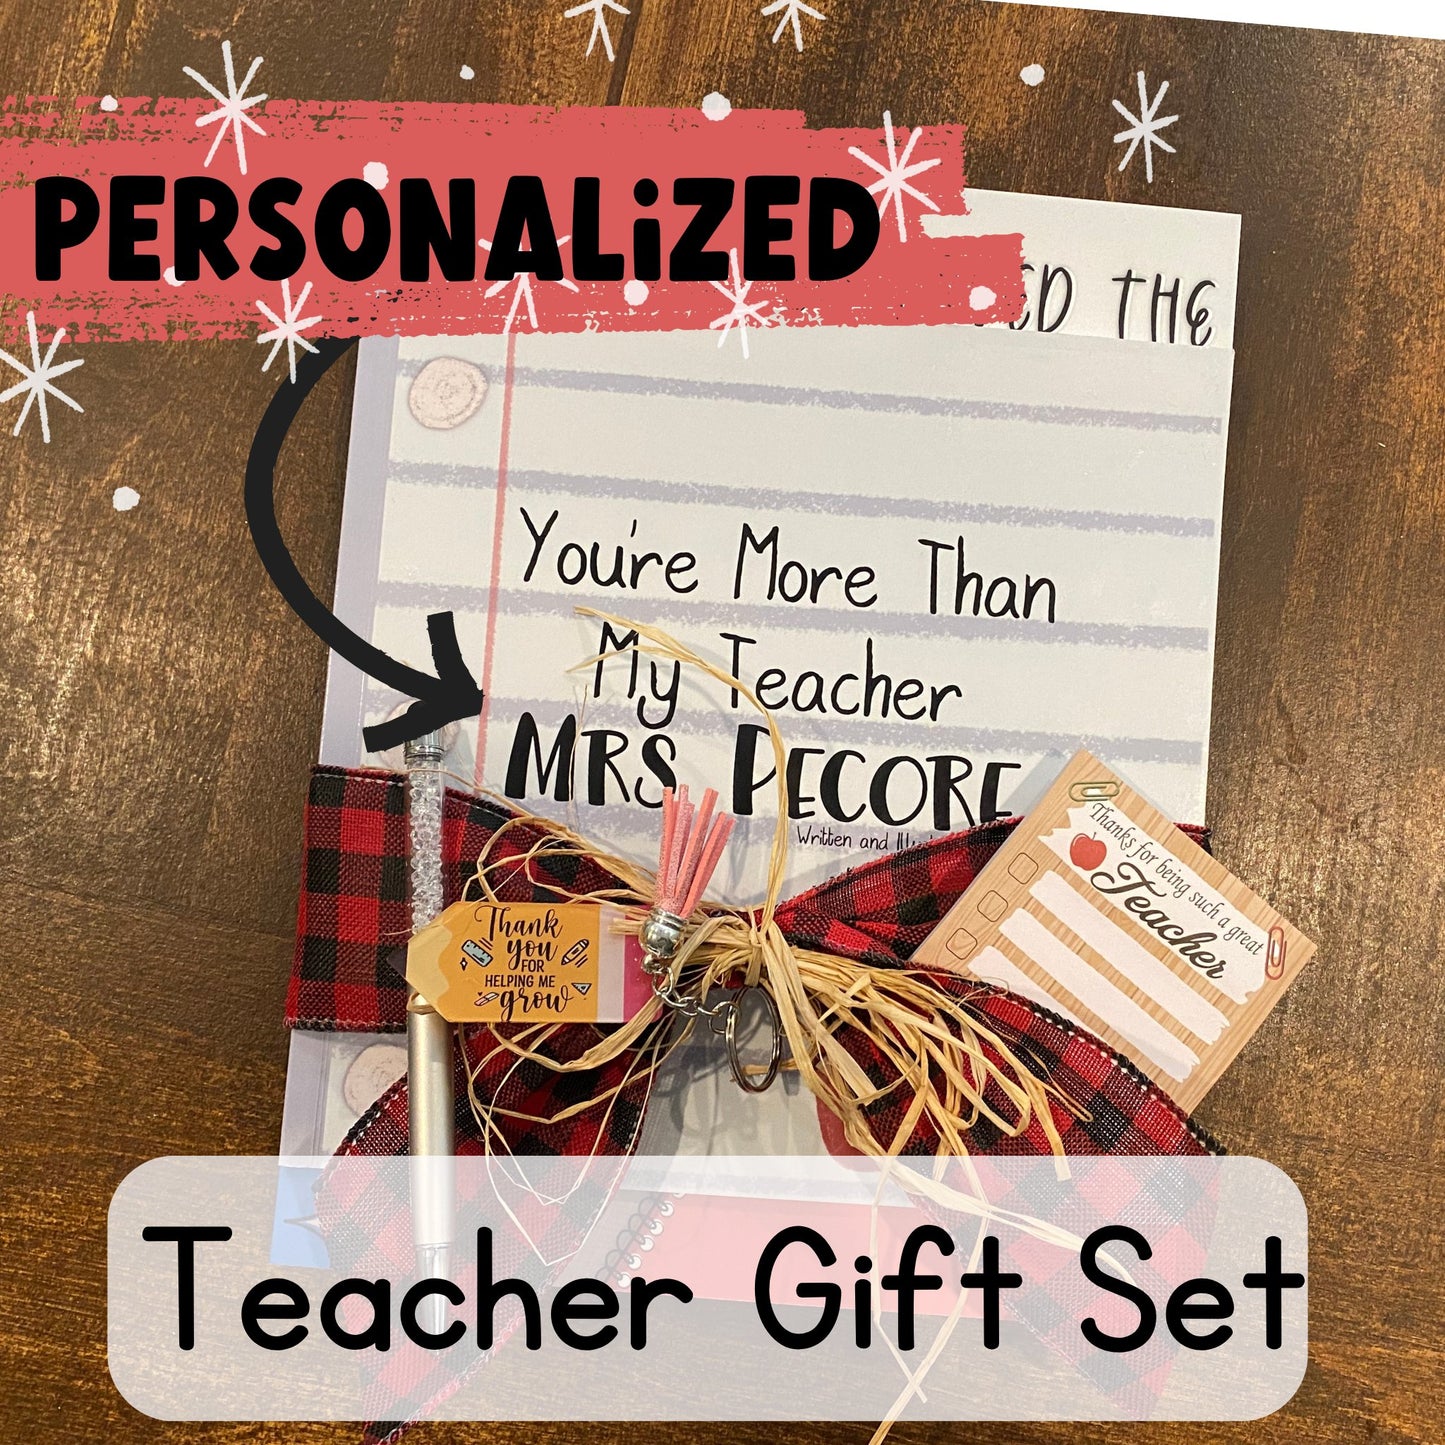 Front image of the teacher gift set self published through Amazon KDP and Kindle Direct Publishing that includes a personalized copy of the book "You're More Than My Teacher."